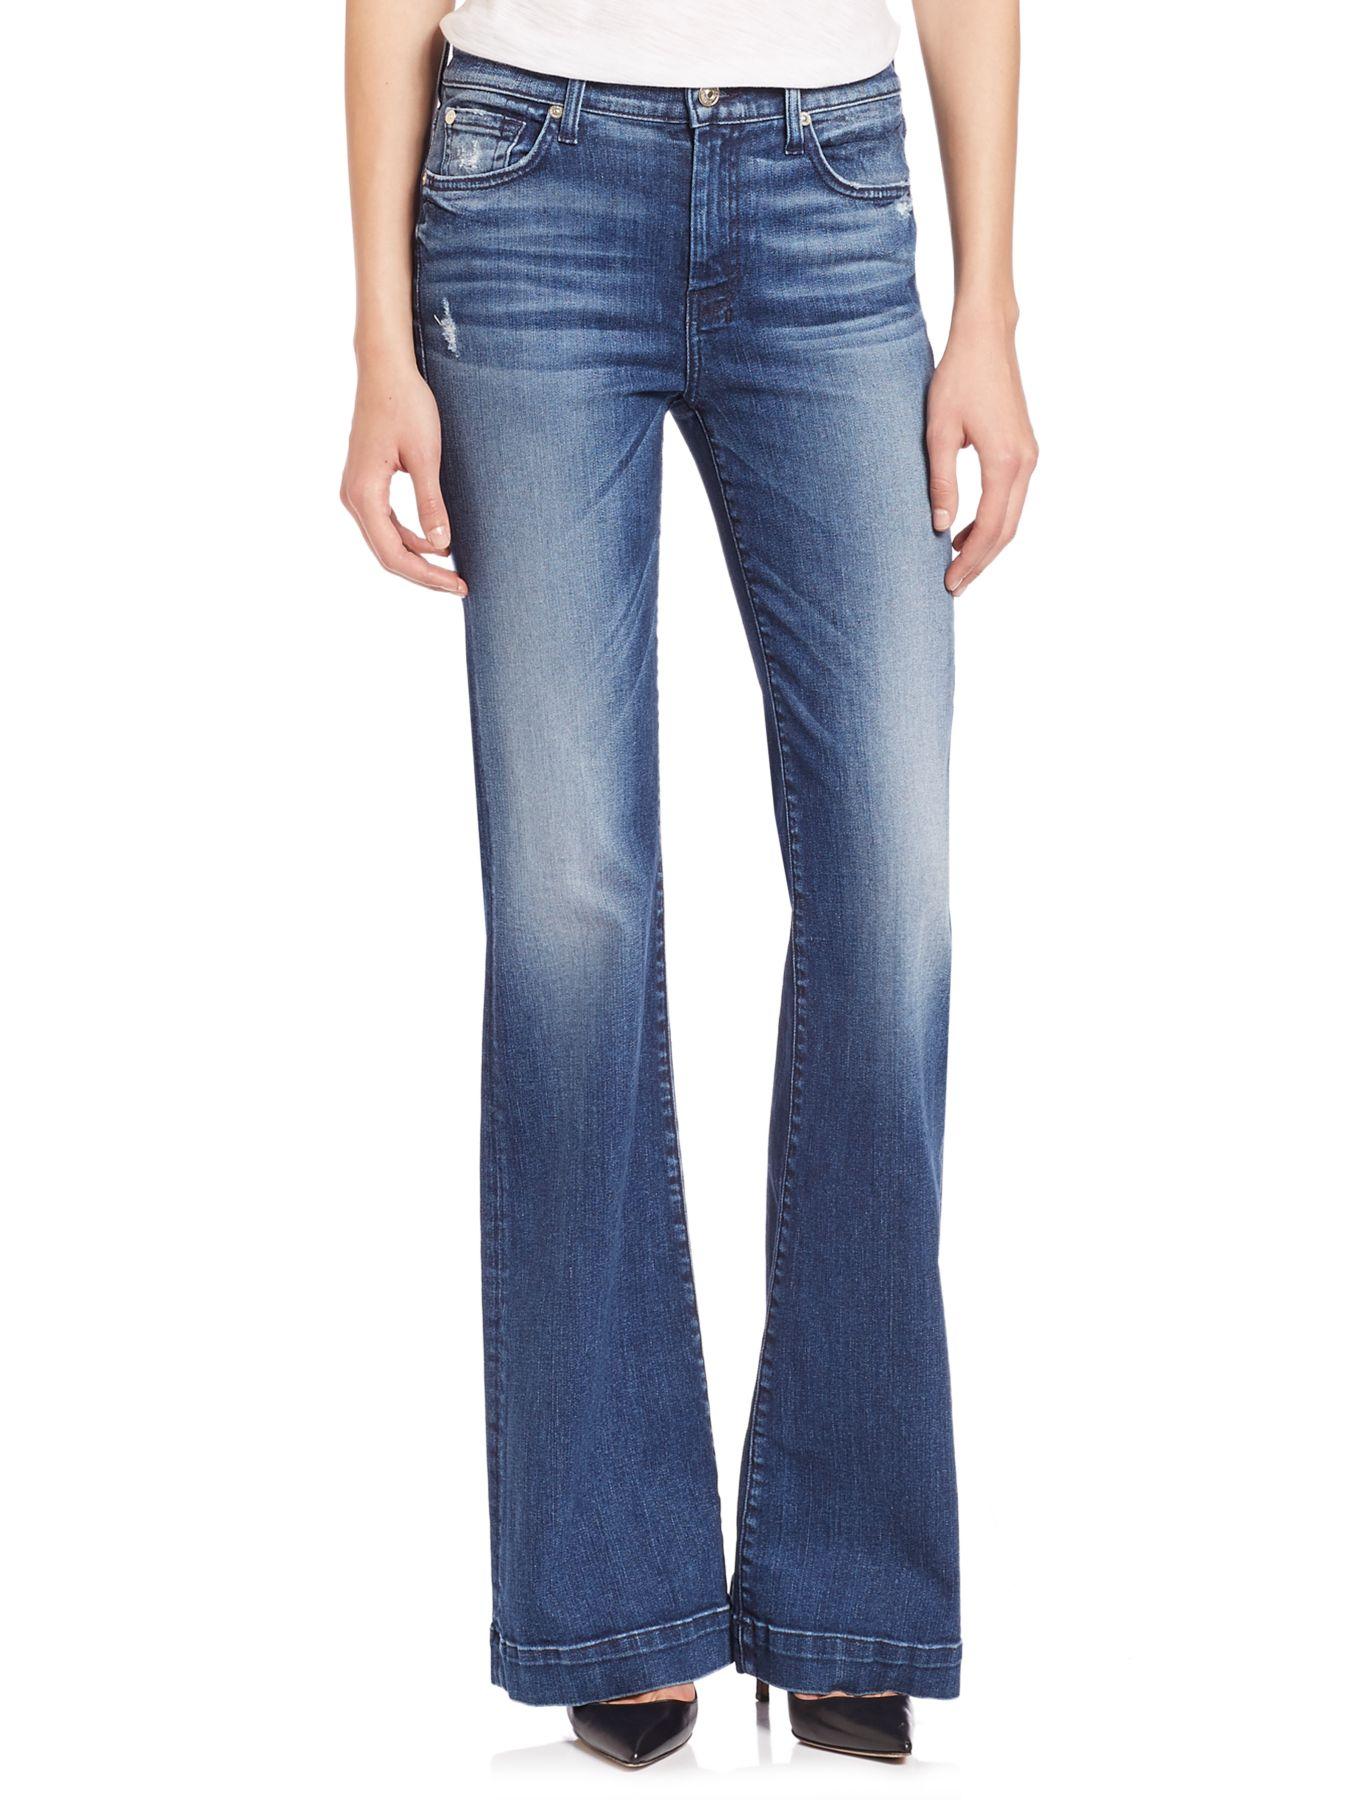 7 For All Mankind Dojo Distressed Flared Jeans in Blue | Lyst